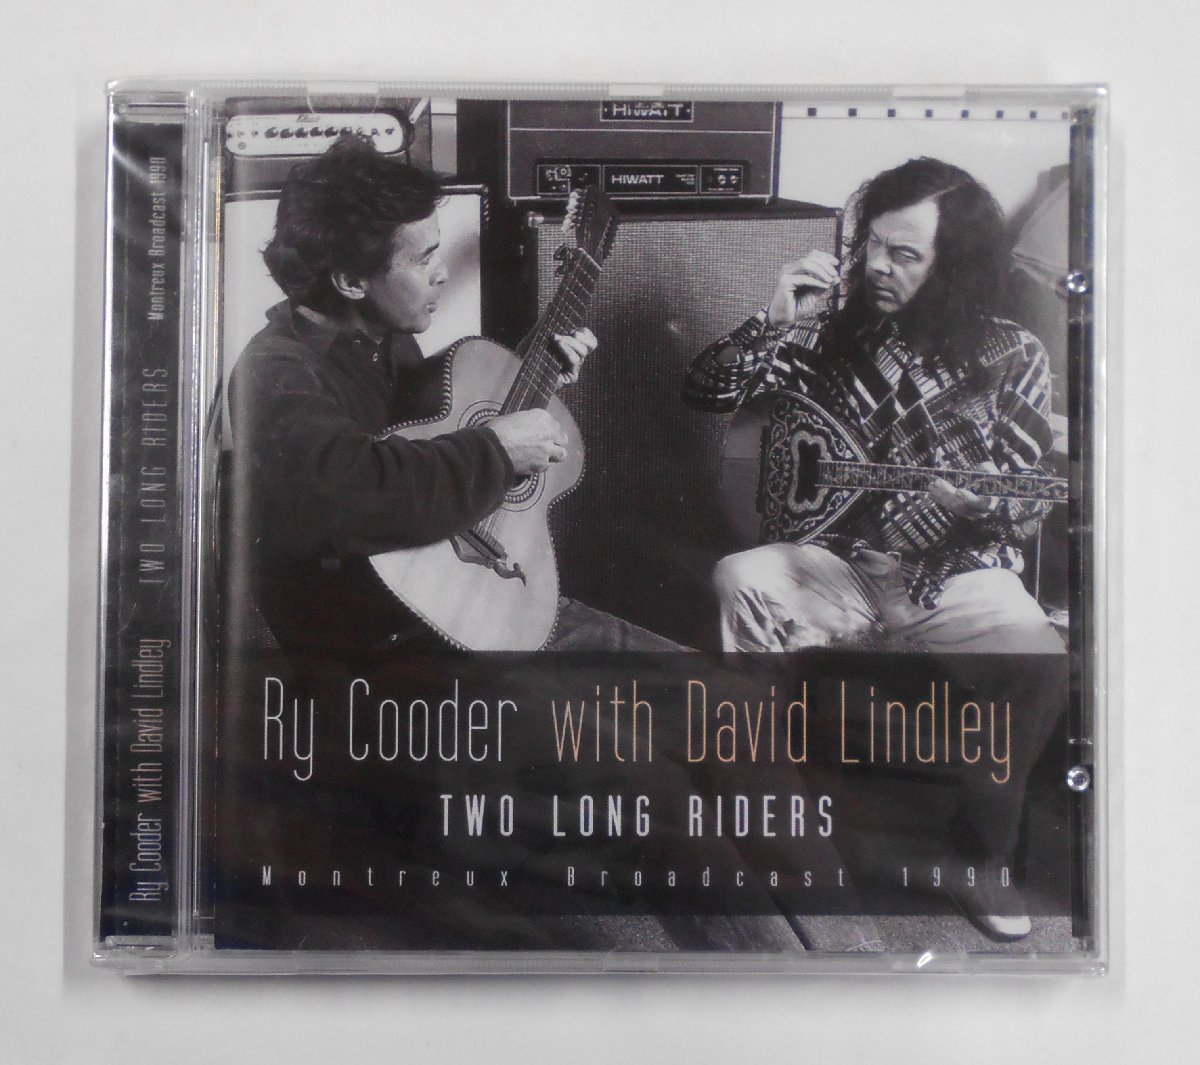 CD Ry Cooder With David Lindley ライ・クーダー＆デヴィッド・リンドレー 『TWO LONG RIDERS』 Montreux Broadcast 1980 【ス466】_画像1